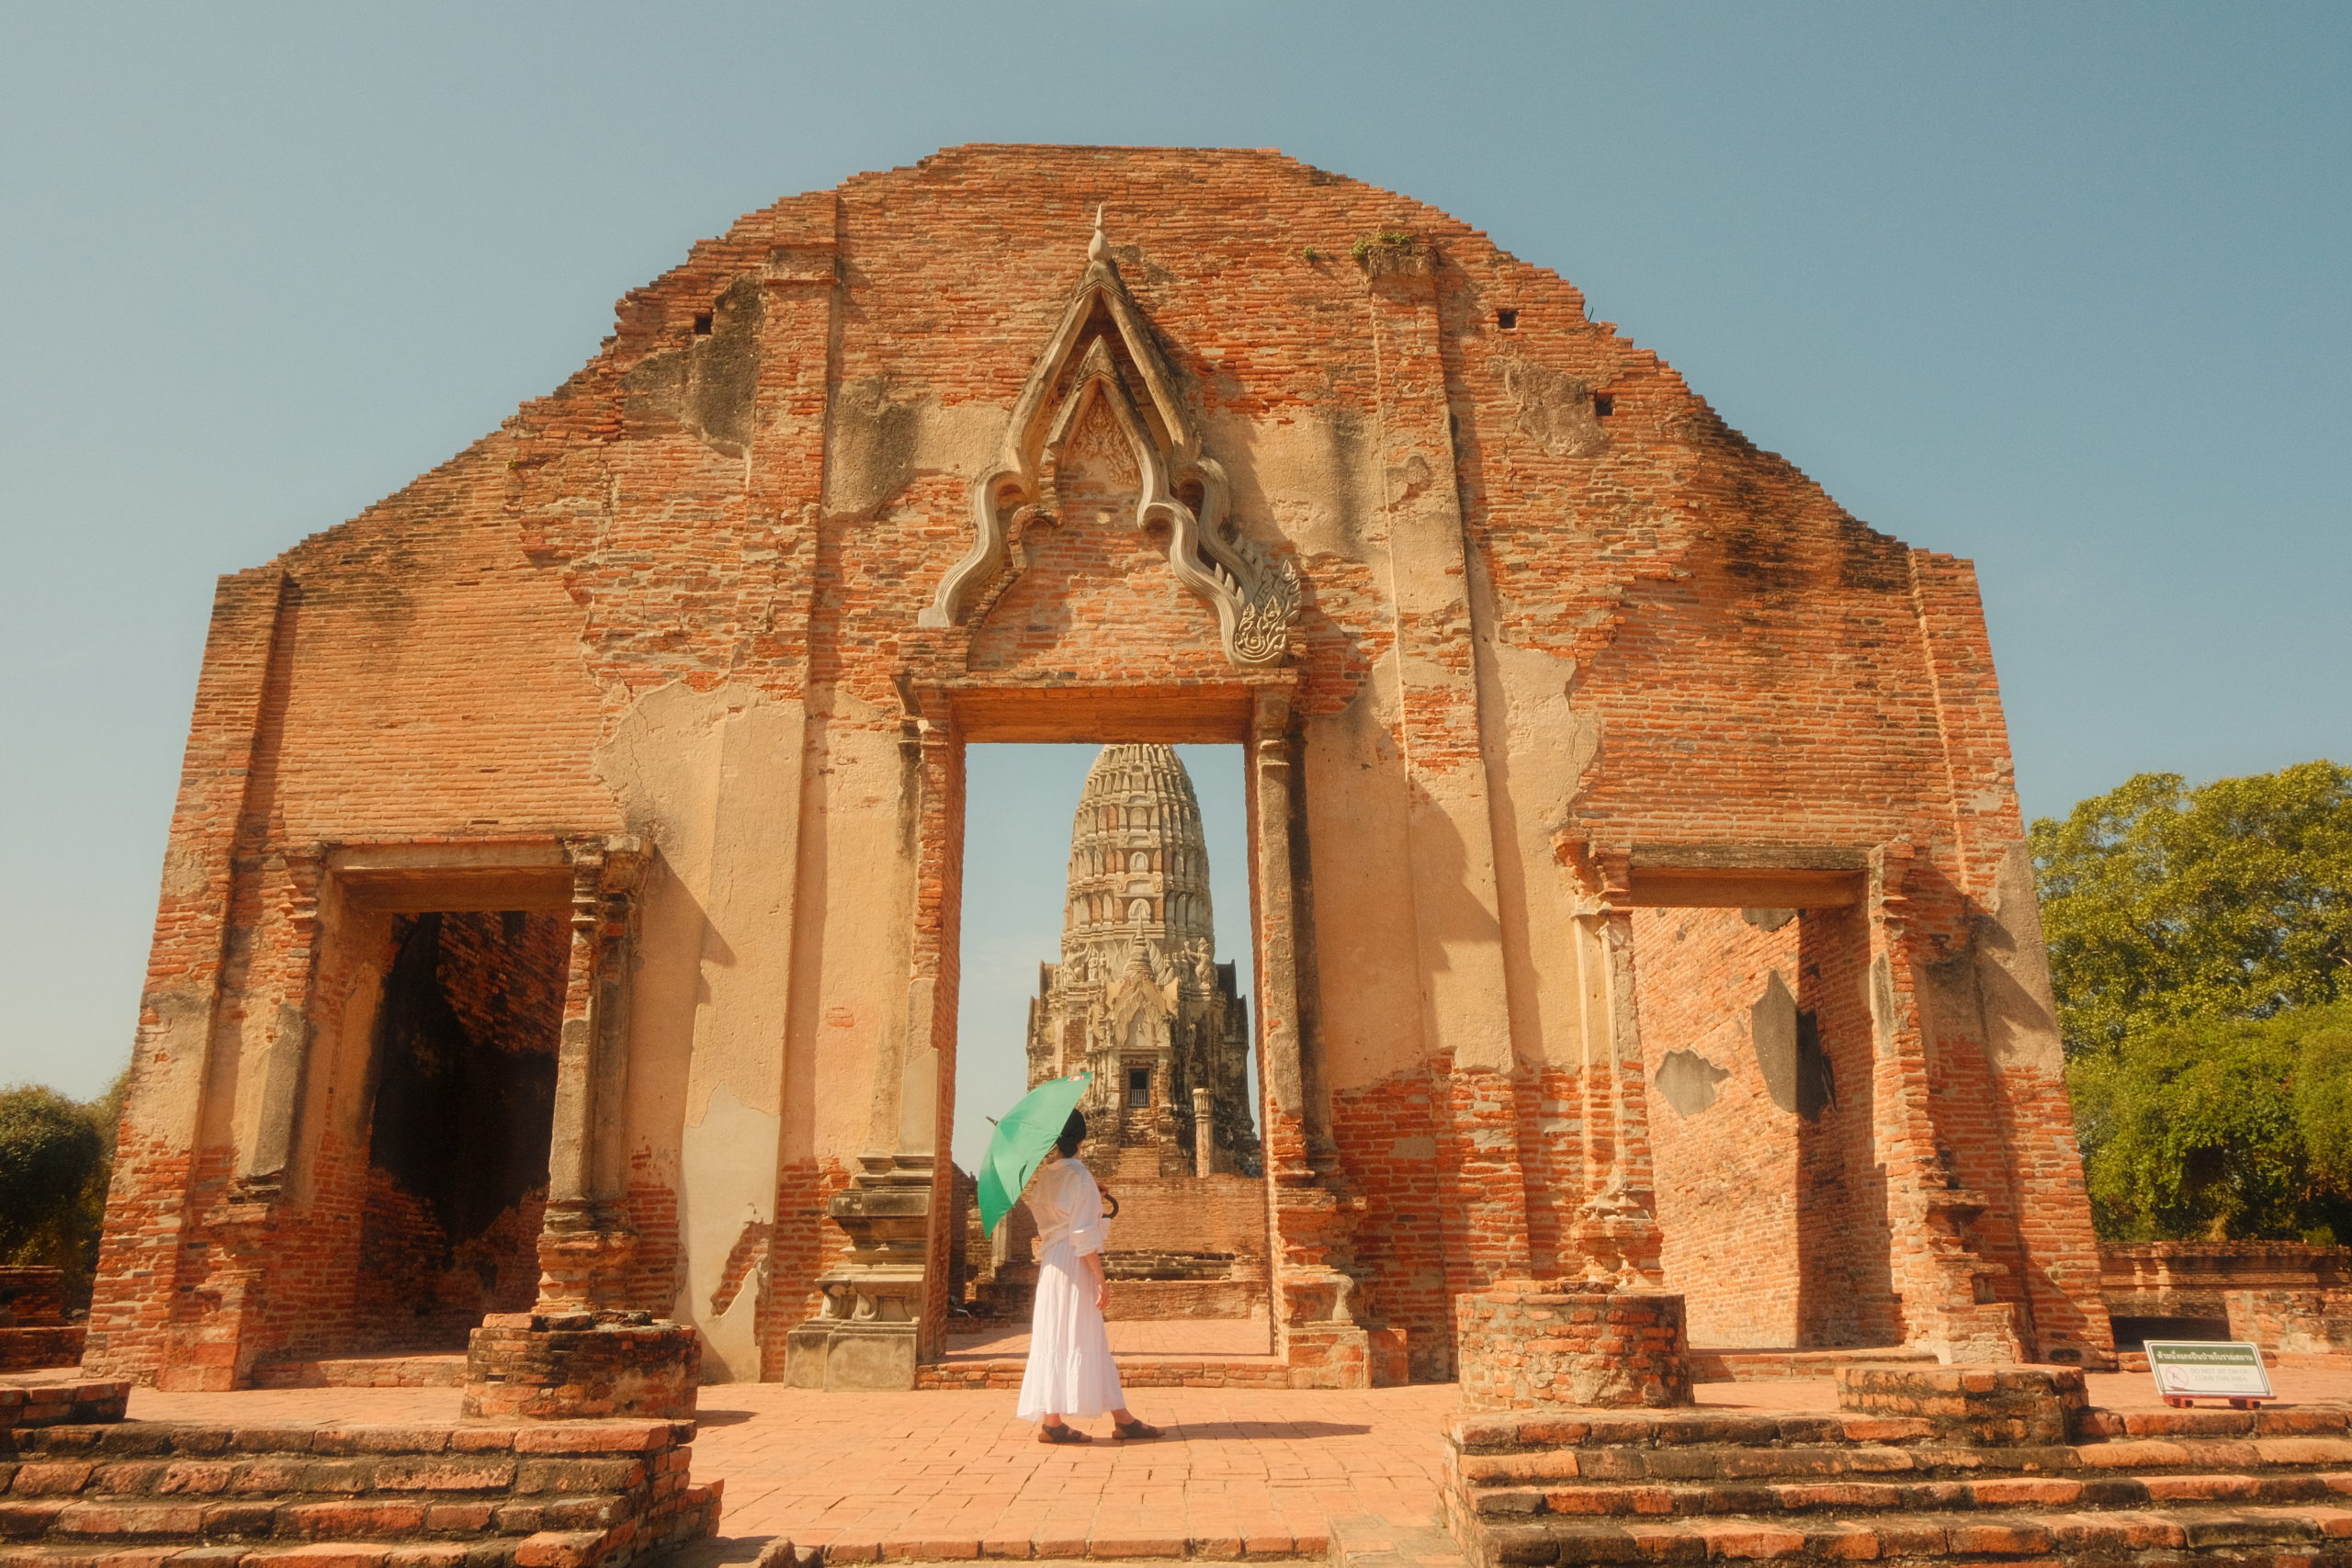 A woman posing with an umbrella to keep the intense sun off her at an ancient temple structure in Ayutthaya.